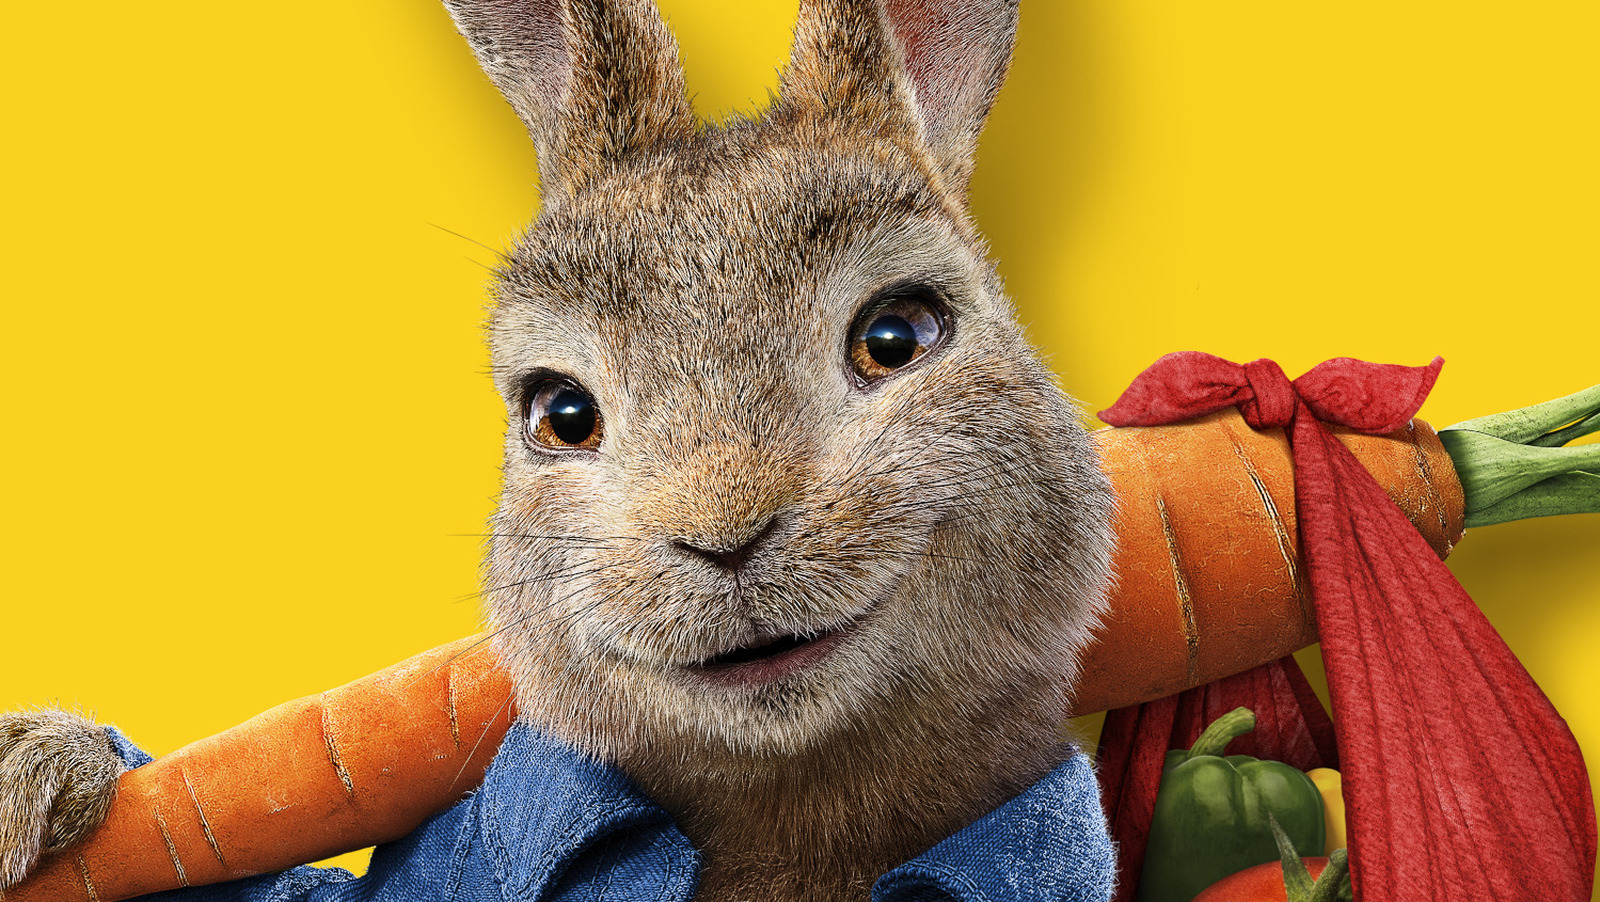 Peter Rabbit 2 - The Runaway Review: No Funny From This Bunny